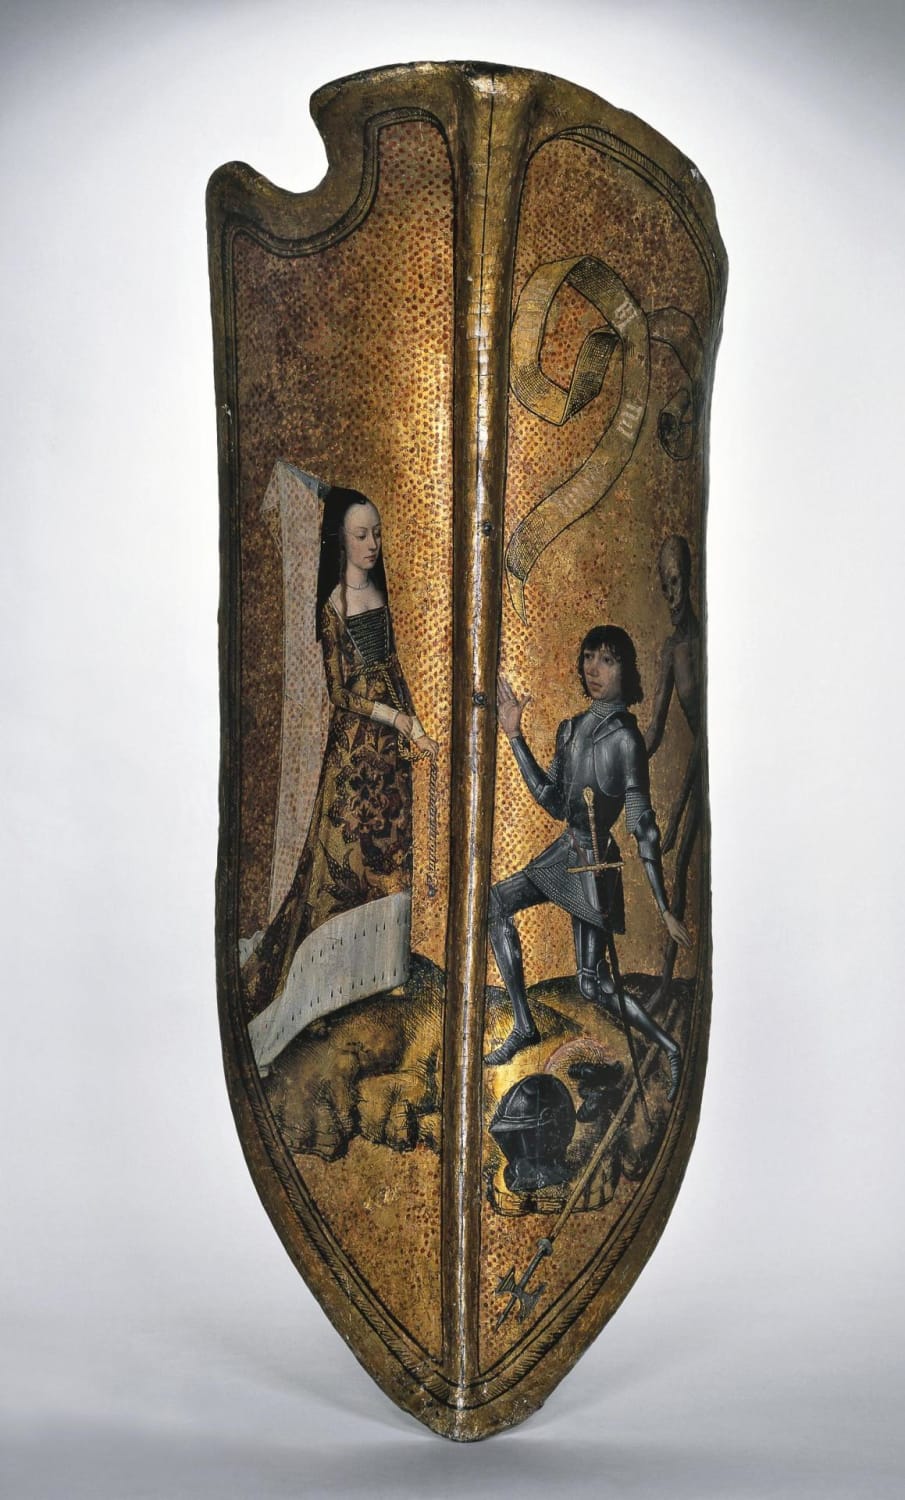 An artfully decorated Pavise from France in the 1400's. This full-body shield would be used by an archer or crossbowman and is displayed at the British Museum.